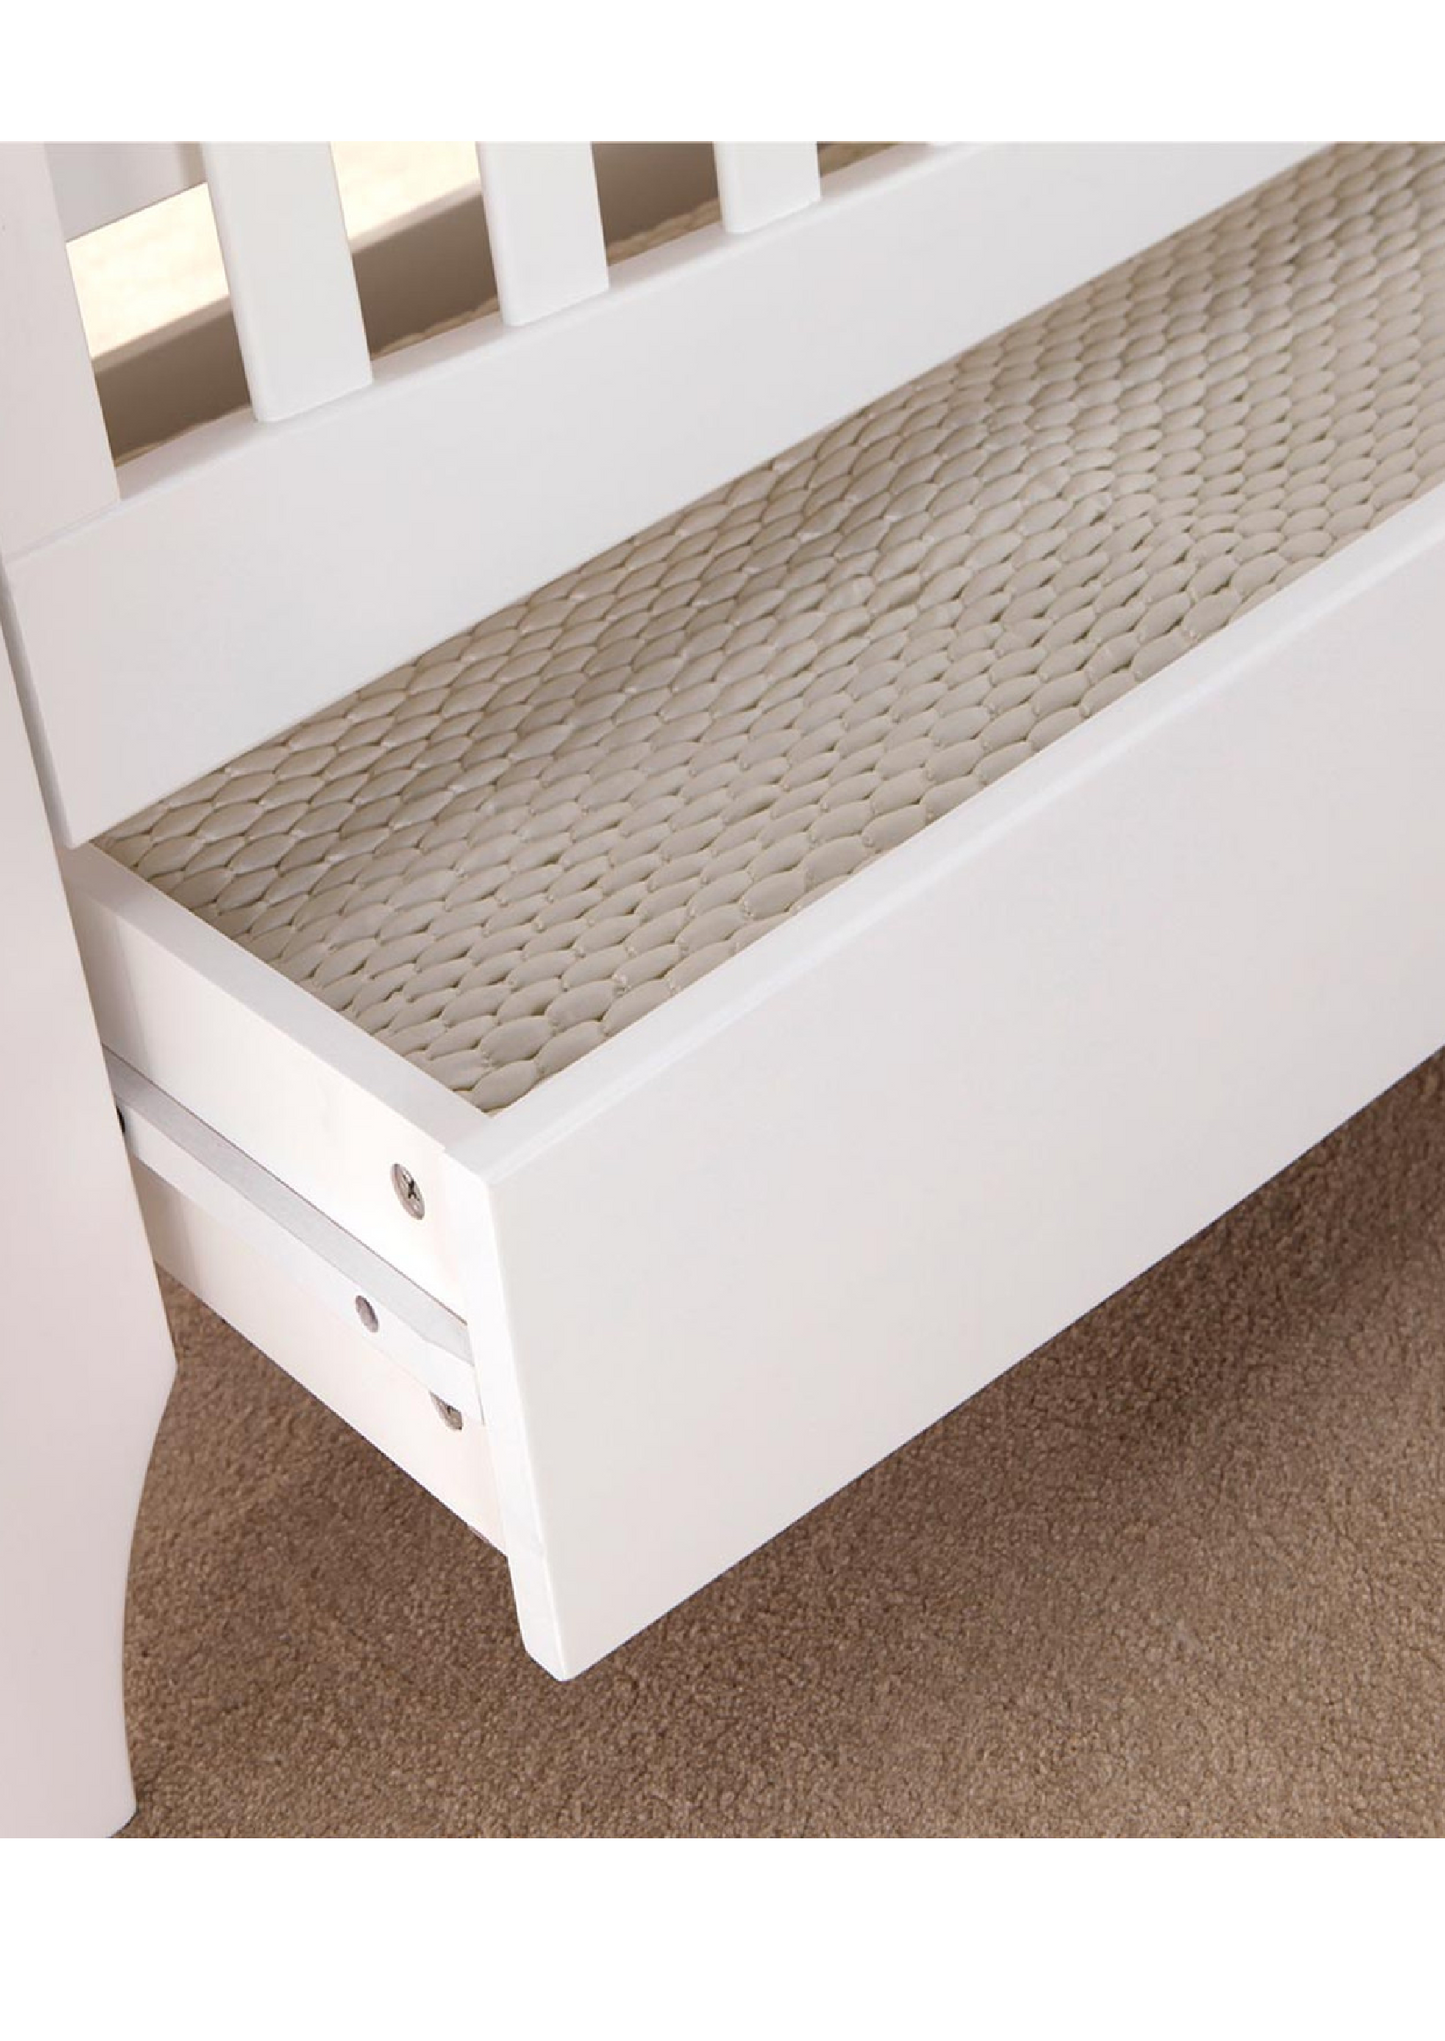 Tutti Bambini Lucas Sleigh Cot Bed with Under Drawer